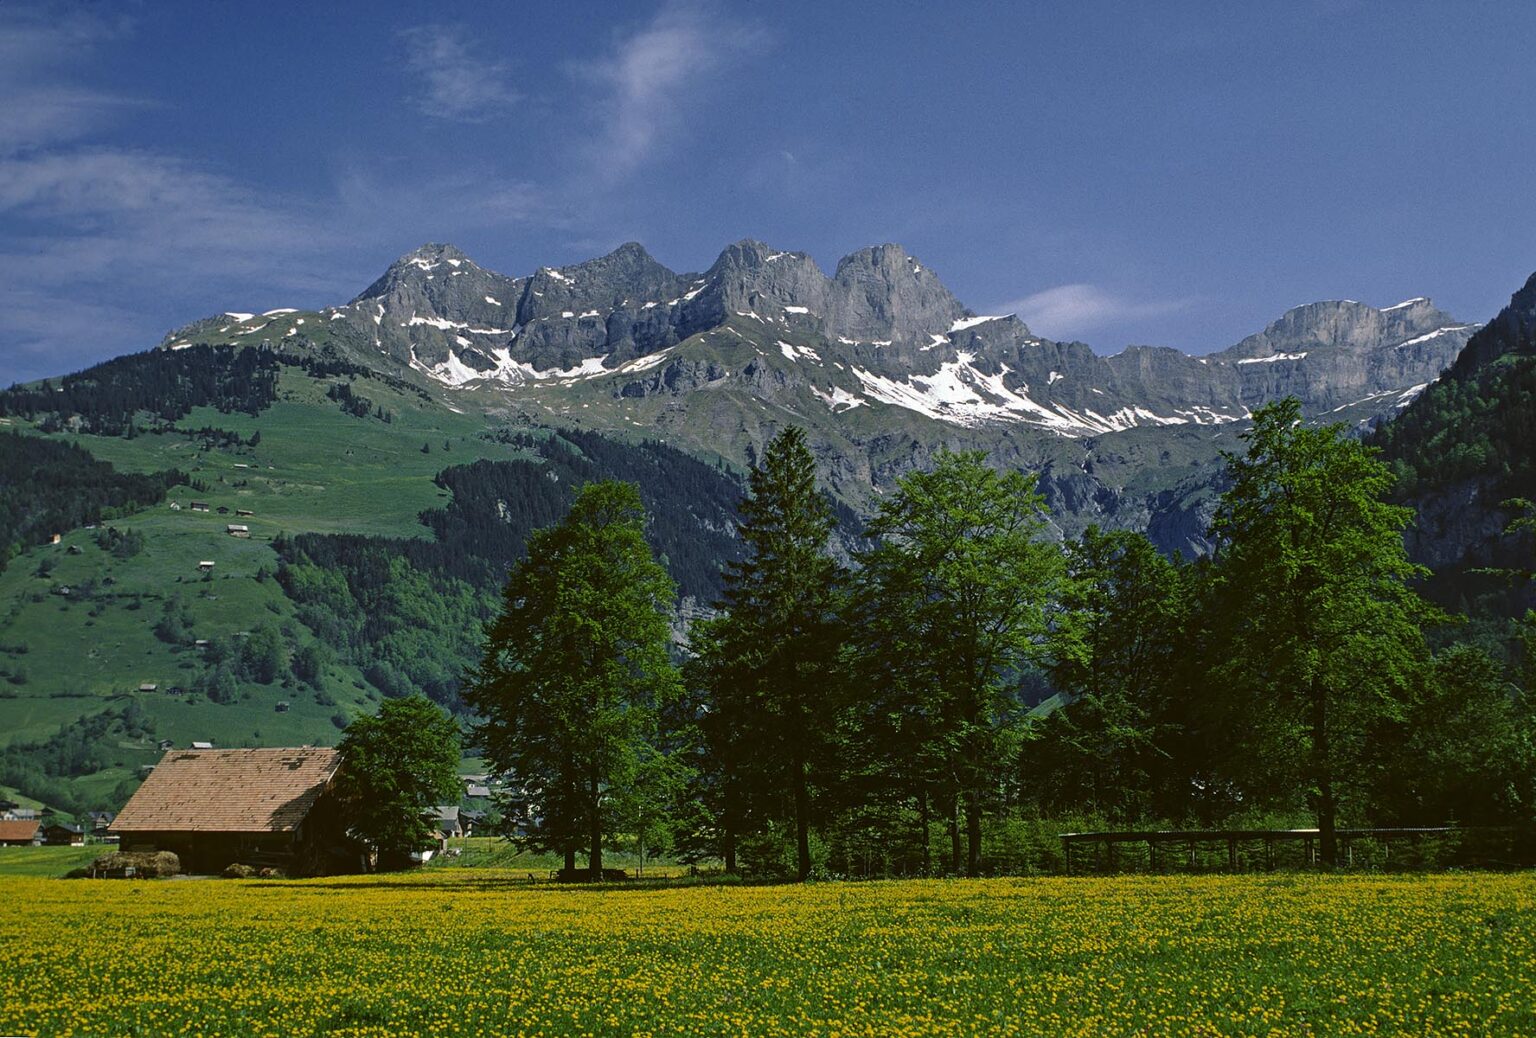 A CHALET in a field of YELLOW WILDFLOWERS in the INTERLAKEN AREA of the SWISS ALPS -  SWITZERLAND